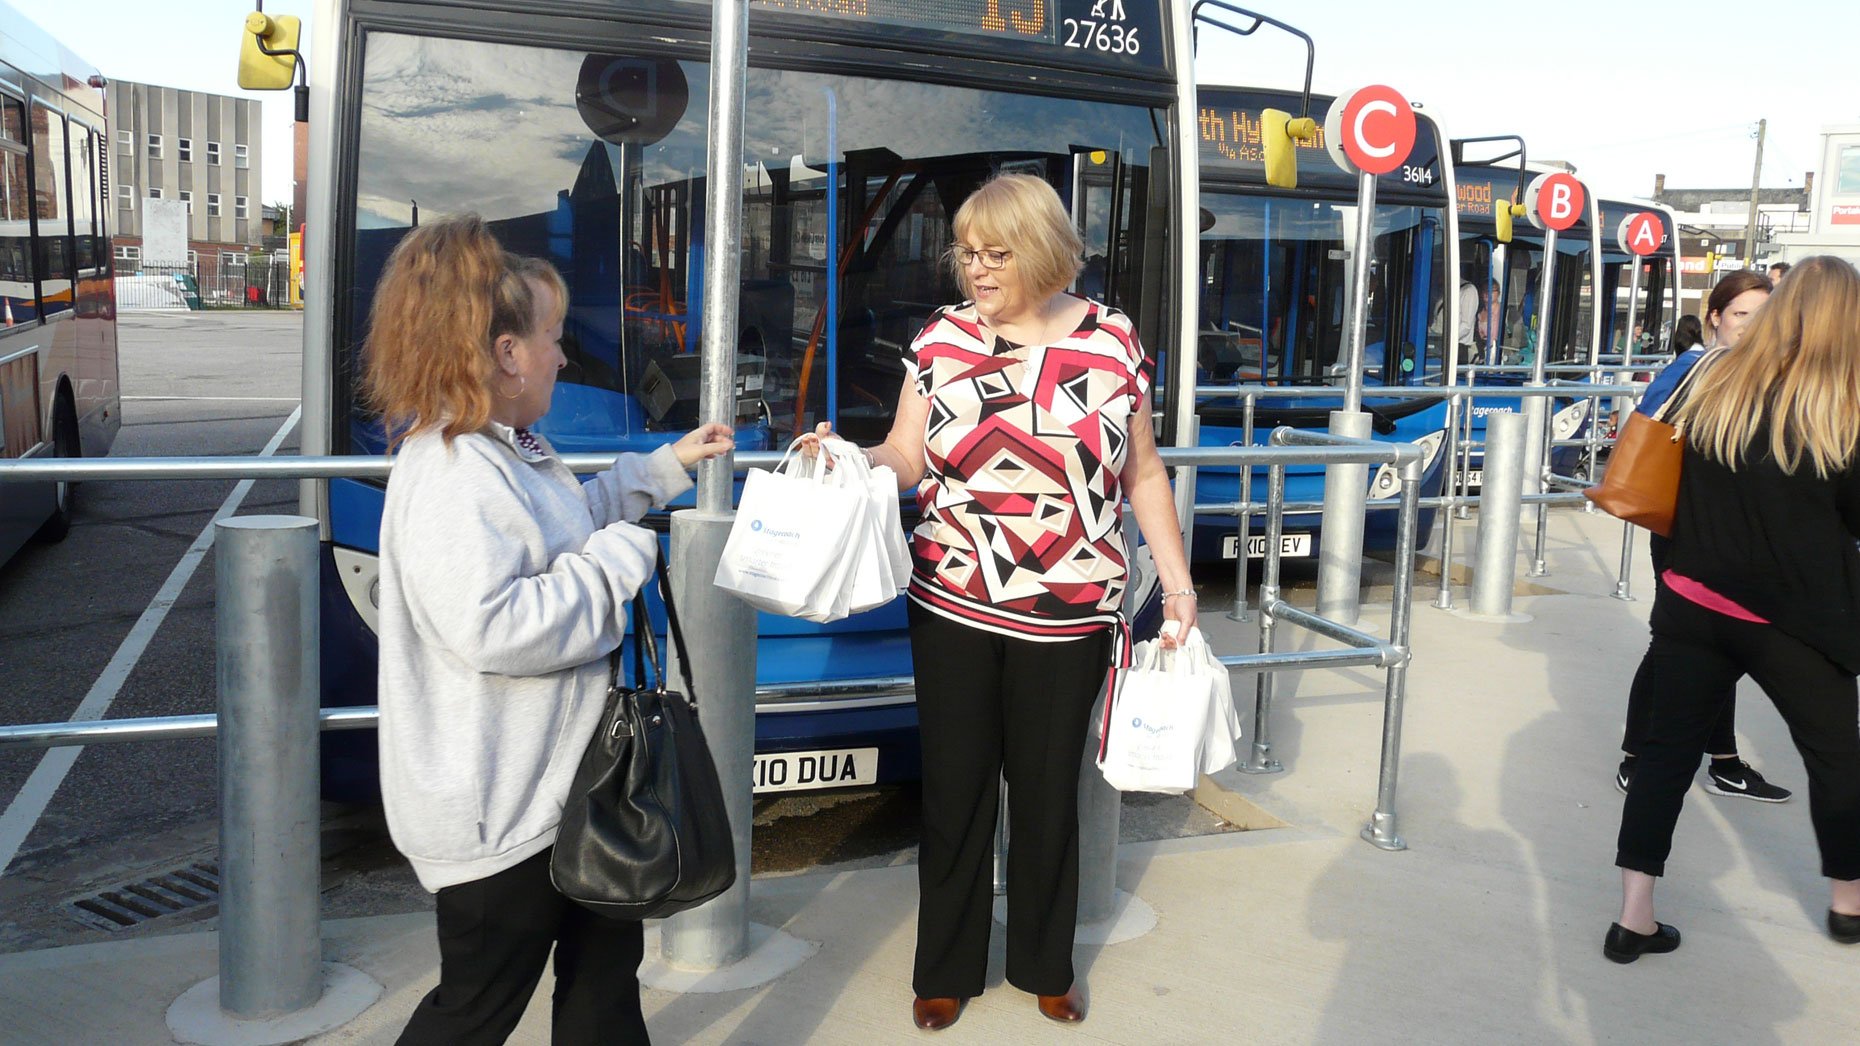 Managing Director Michelle Hargreaves handing out breakfast bags to loyal customers.